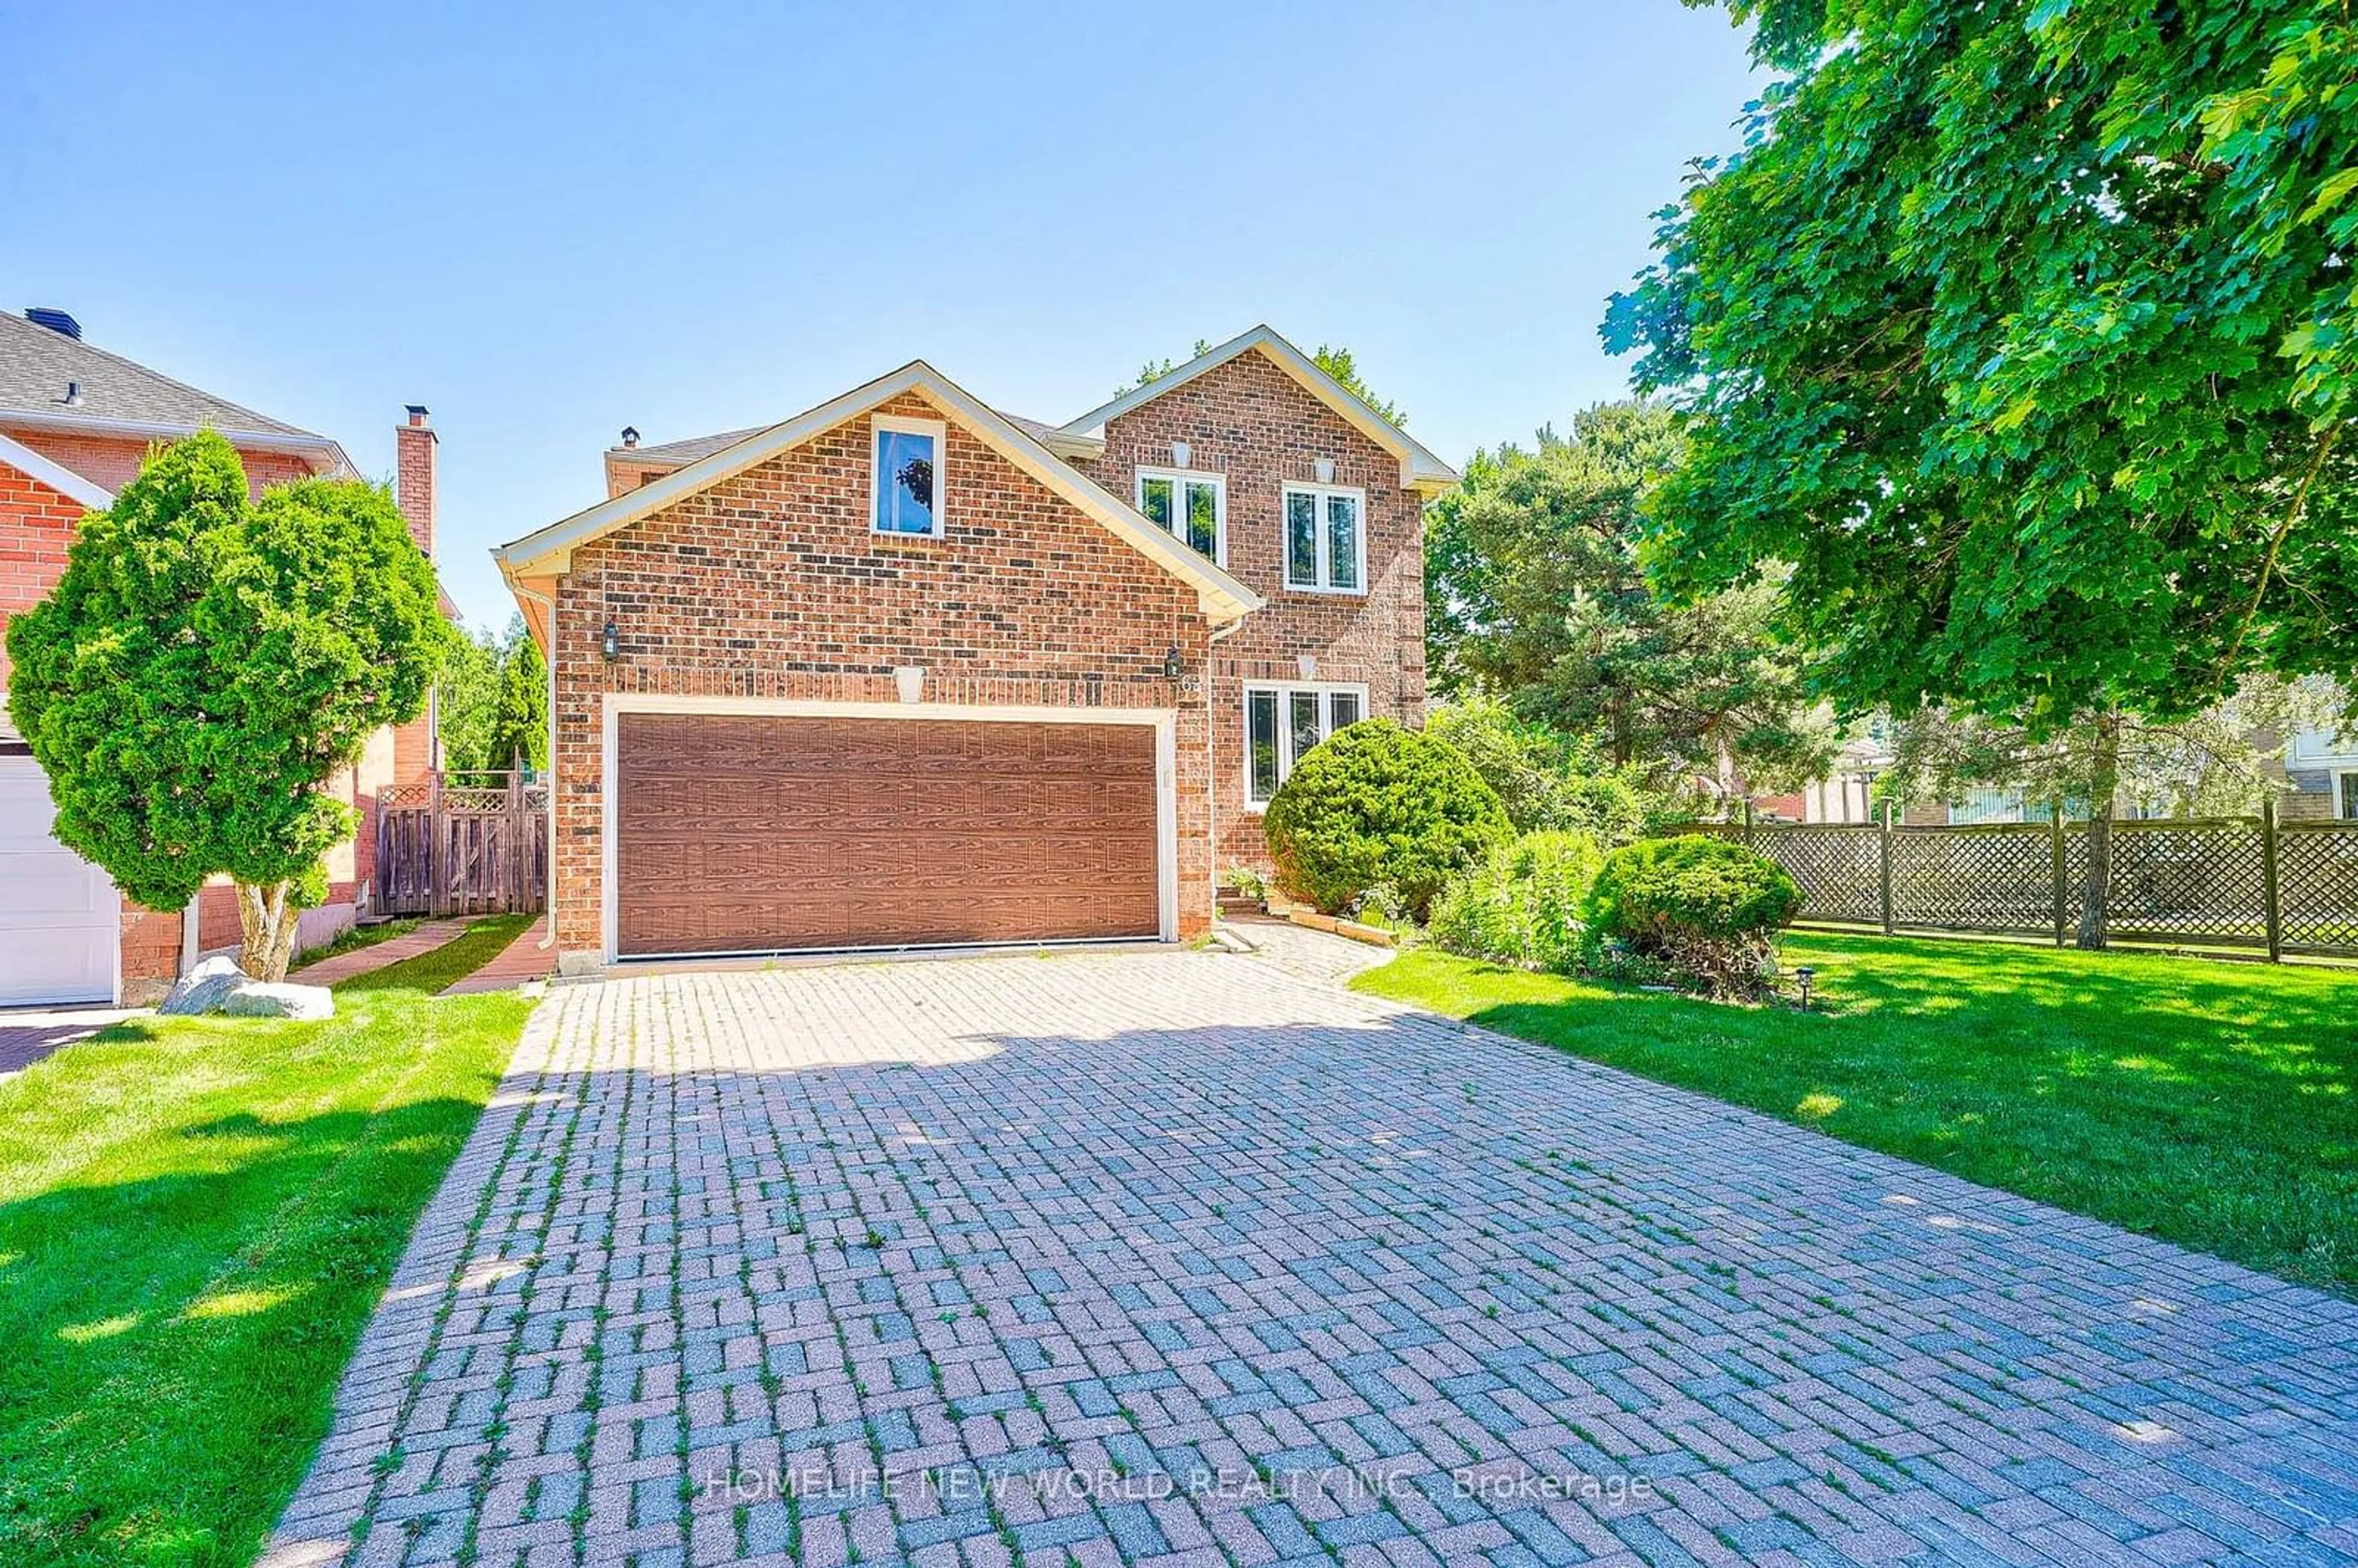 Home with brick exterior material for 62 Halstead Dr, Markham Ontario L3R 7Z1